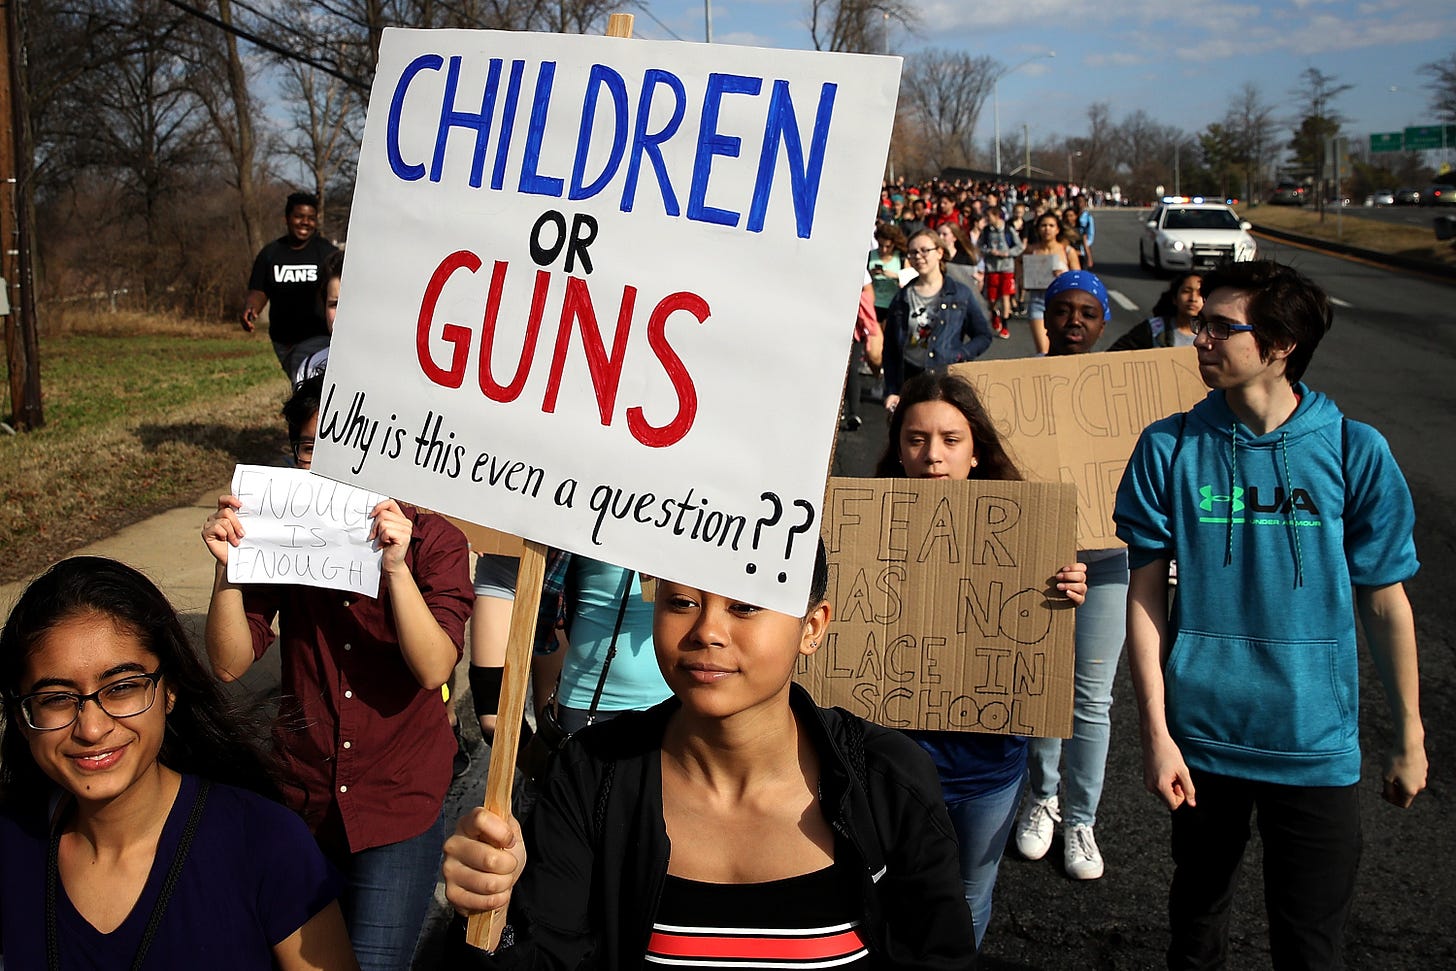 A group of teenagers protesting outdoors against gun violenve after the Santa Fe High School shooting. The dark-skinned girl in the front of the procession is holding a sign that says "CHILDREN OR GUNS Why is this even a question??" Other visible signs say "Enough is Enough" and "Fear Has No Place In School."